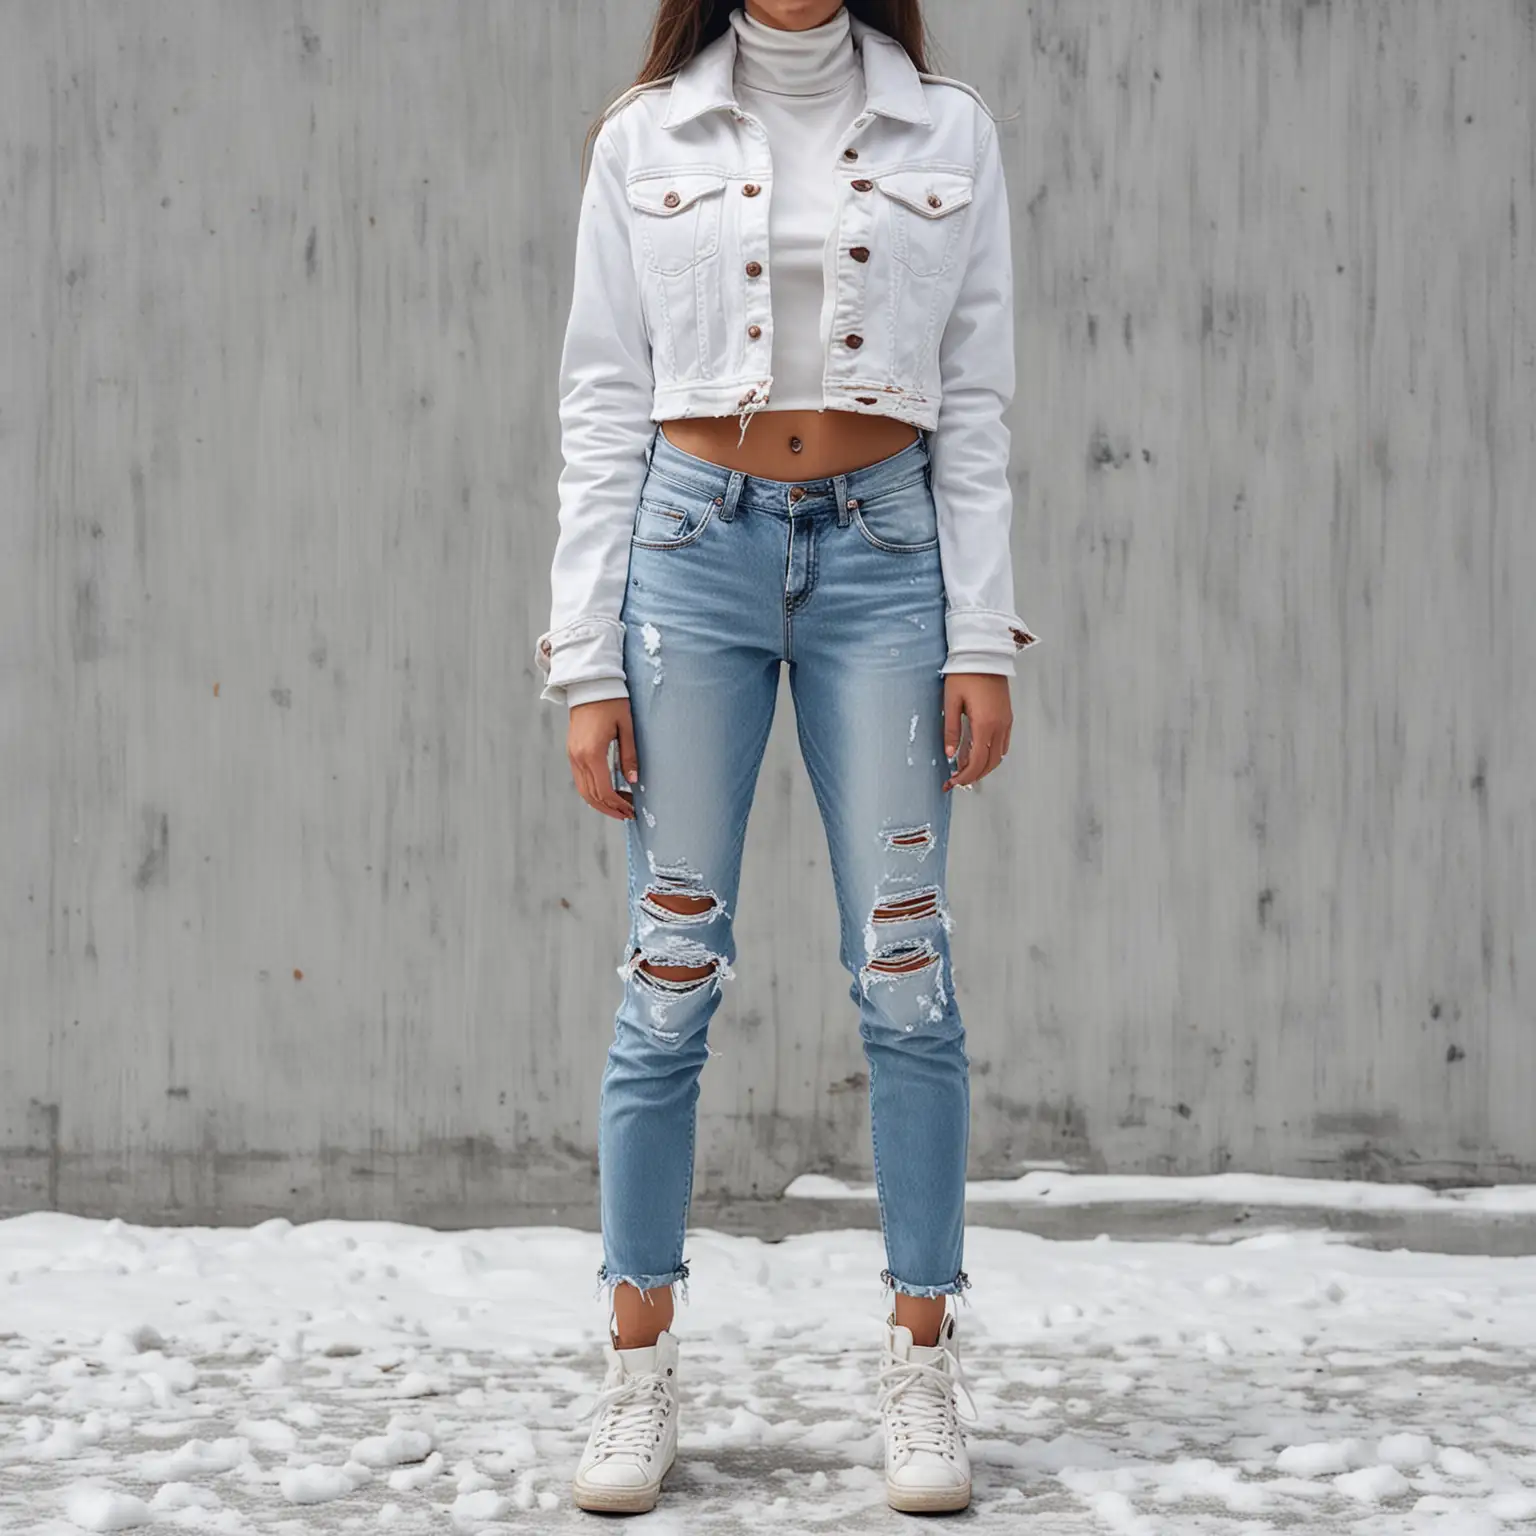 Fashionable Women in Ripped Jeans and White Jackets against Snowy Backdrop